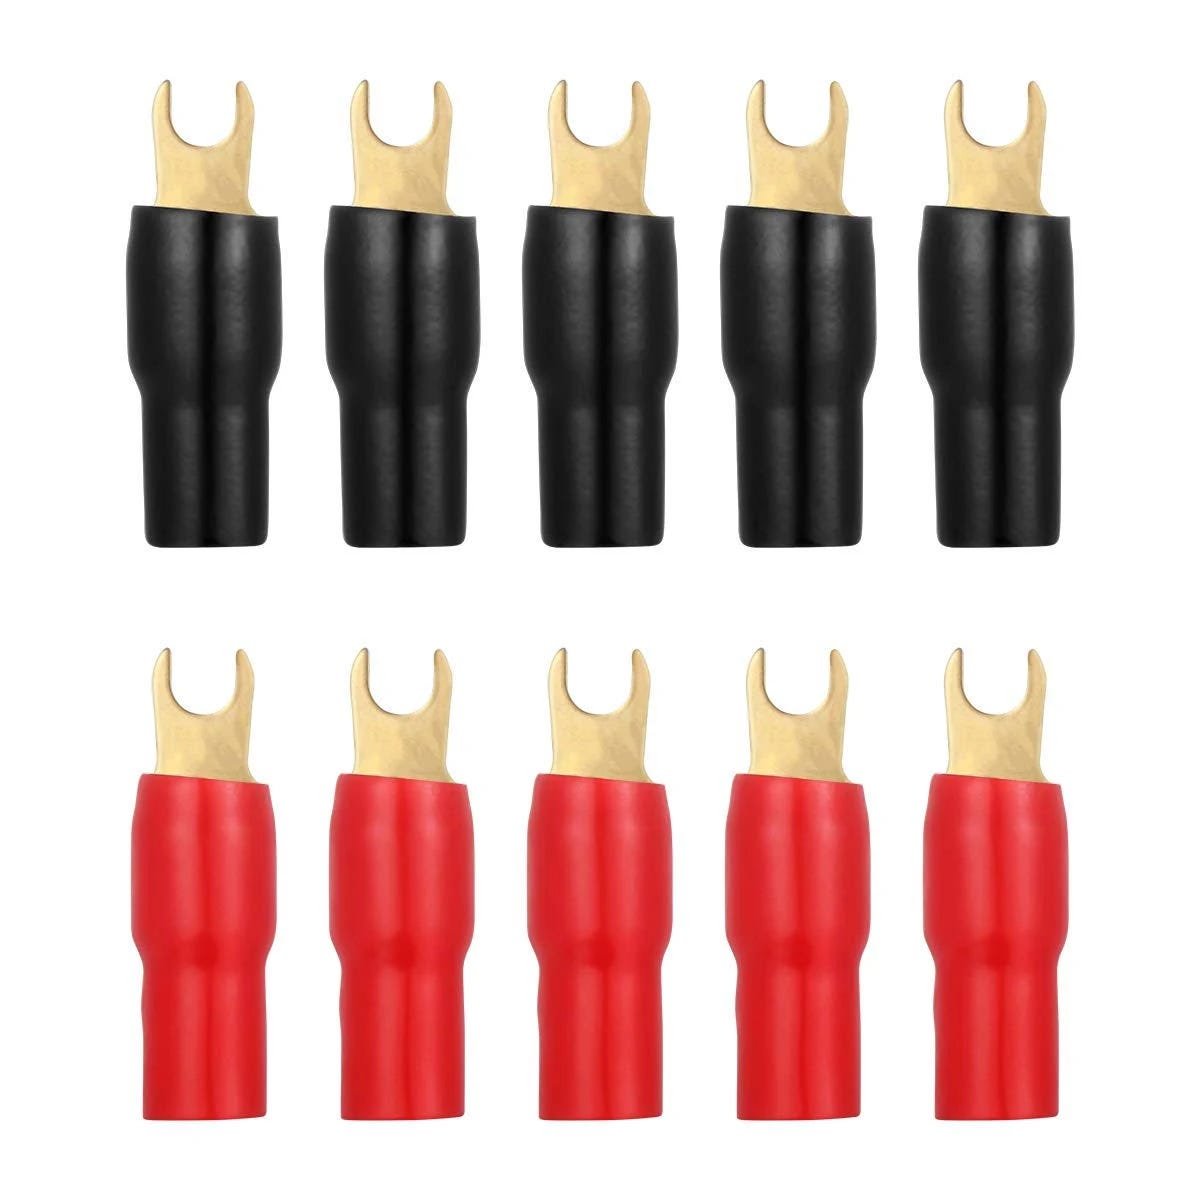 5-Pair Spade Terminal Strip Wire Connectors and Adapters for High-Quality Audio | Image